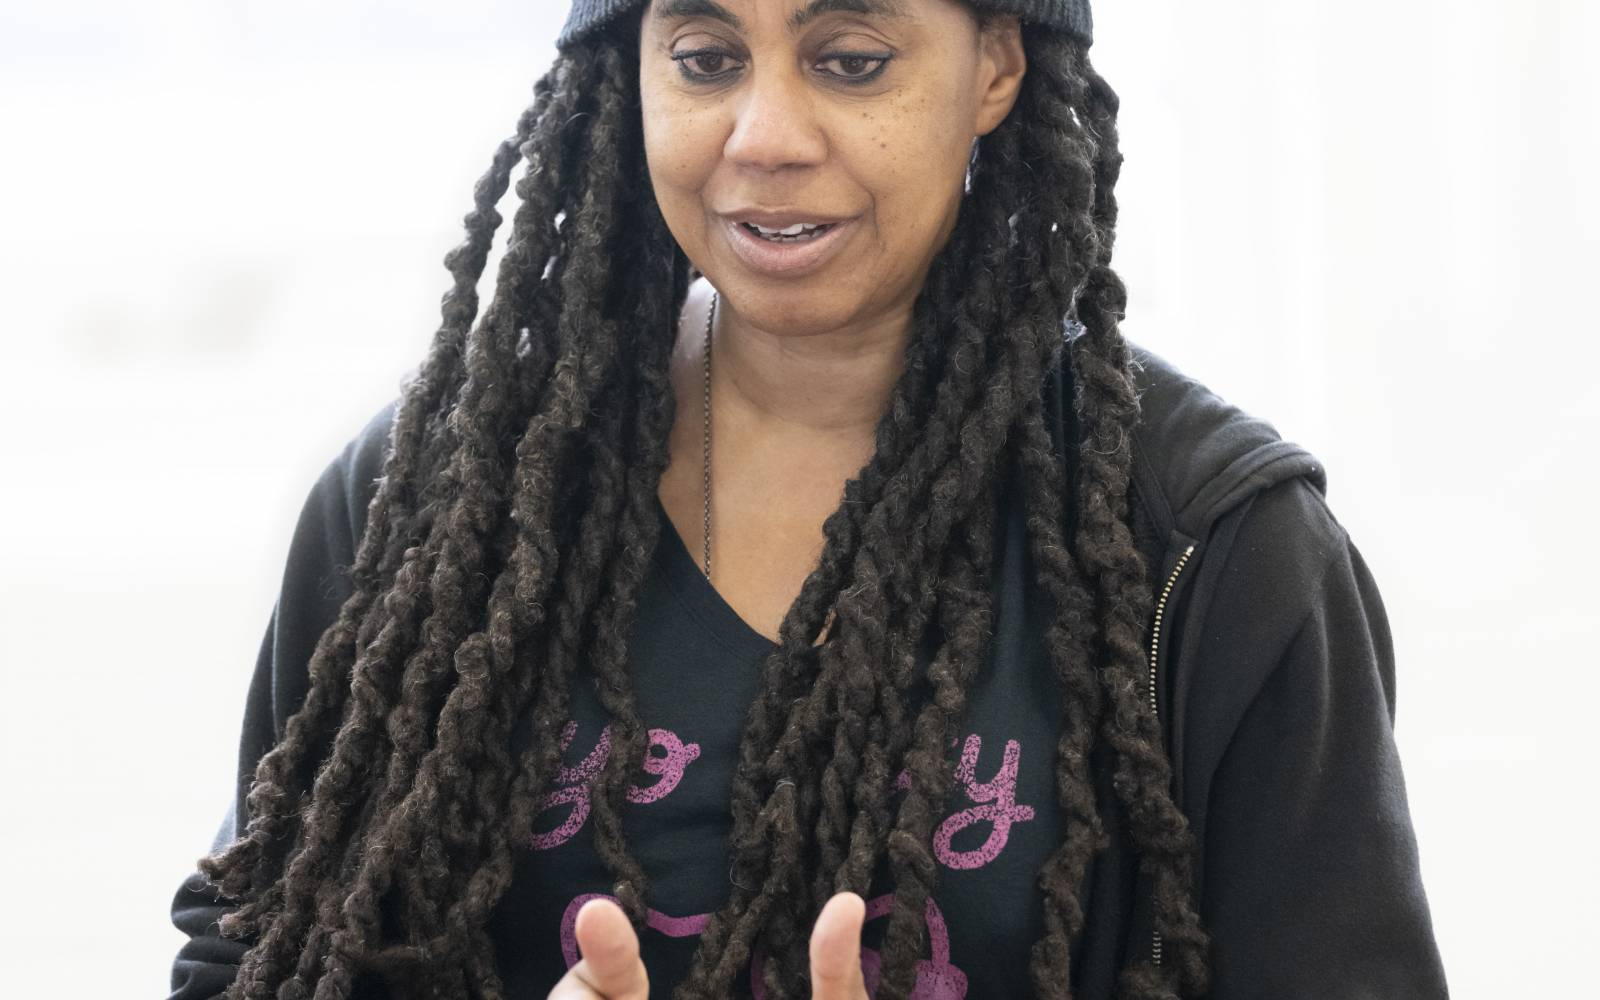 Photo of Suzan-Lori Parks (long black twisted braids, black beanie, black zipped hoodie). She's deep in explanation, with both hands out in front of her as if describing something.